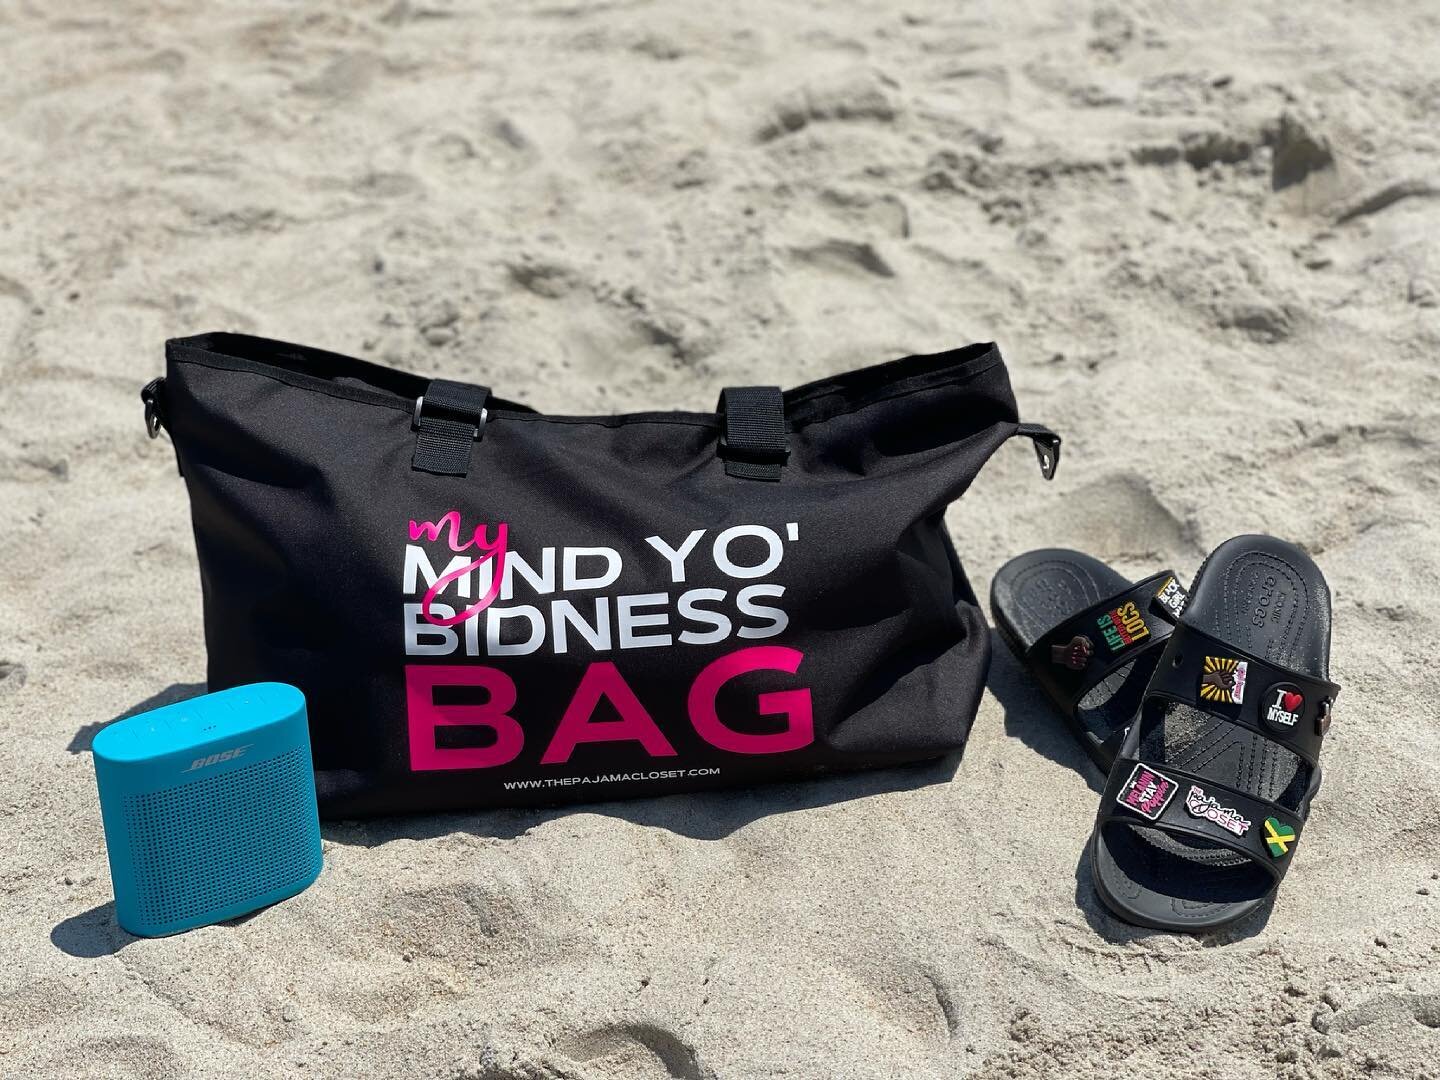 We&rsquo;re at the beach today minding our business. 

#overnightbags #mindyourbusiness #weekenderbag #weekender #pinklovers #crocs #thepajamacloset